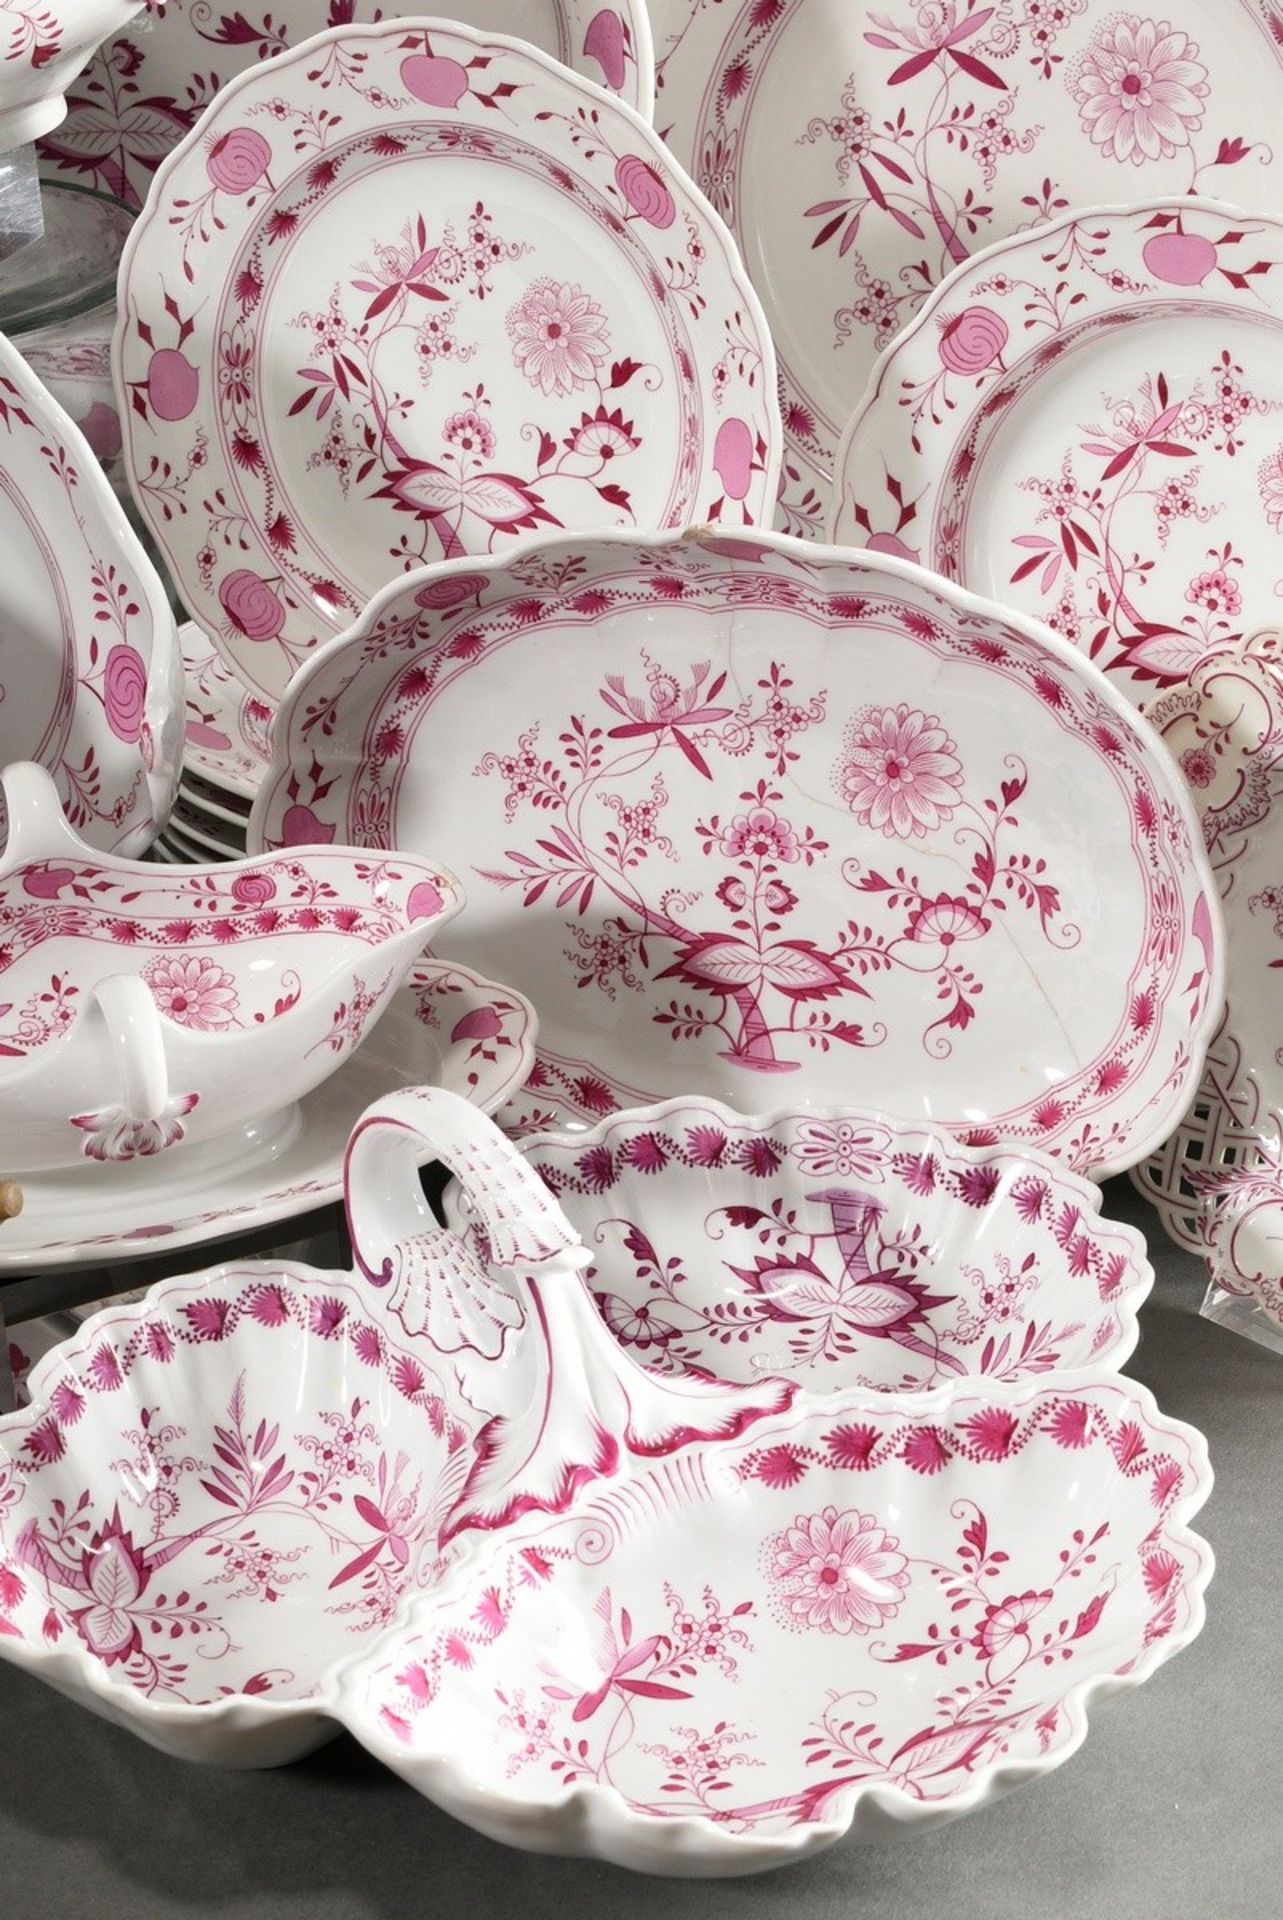 65 Pieces rare Meissen dinner service "Zwiebelmuster Pink", custom made around 1900, consisting of: - Image 6 of 27